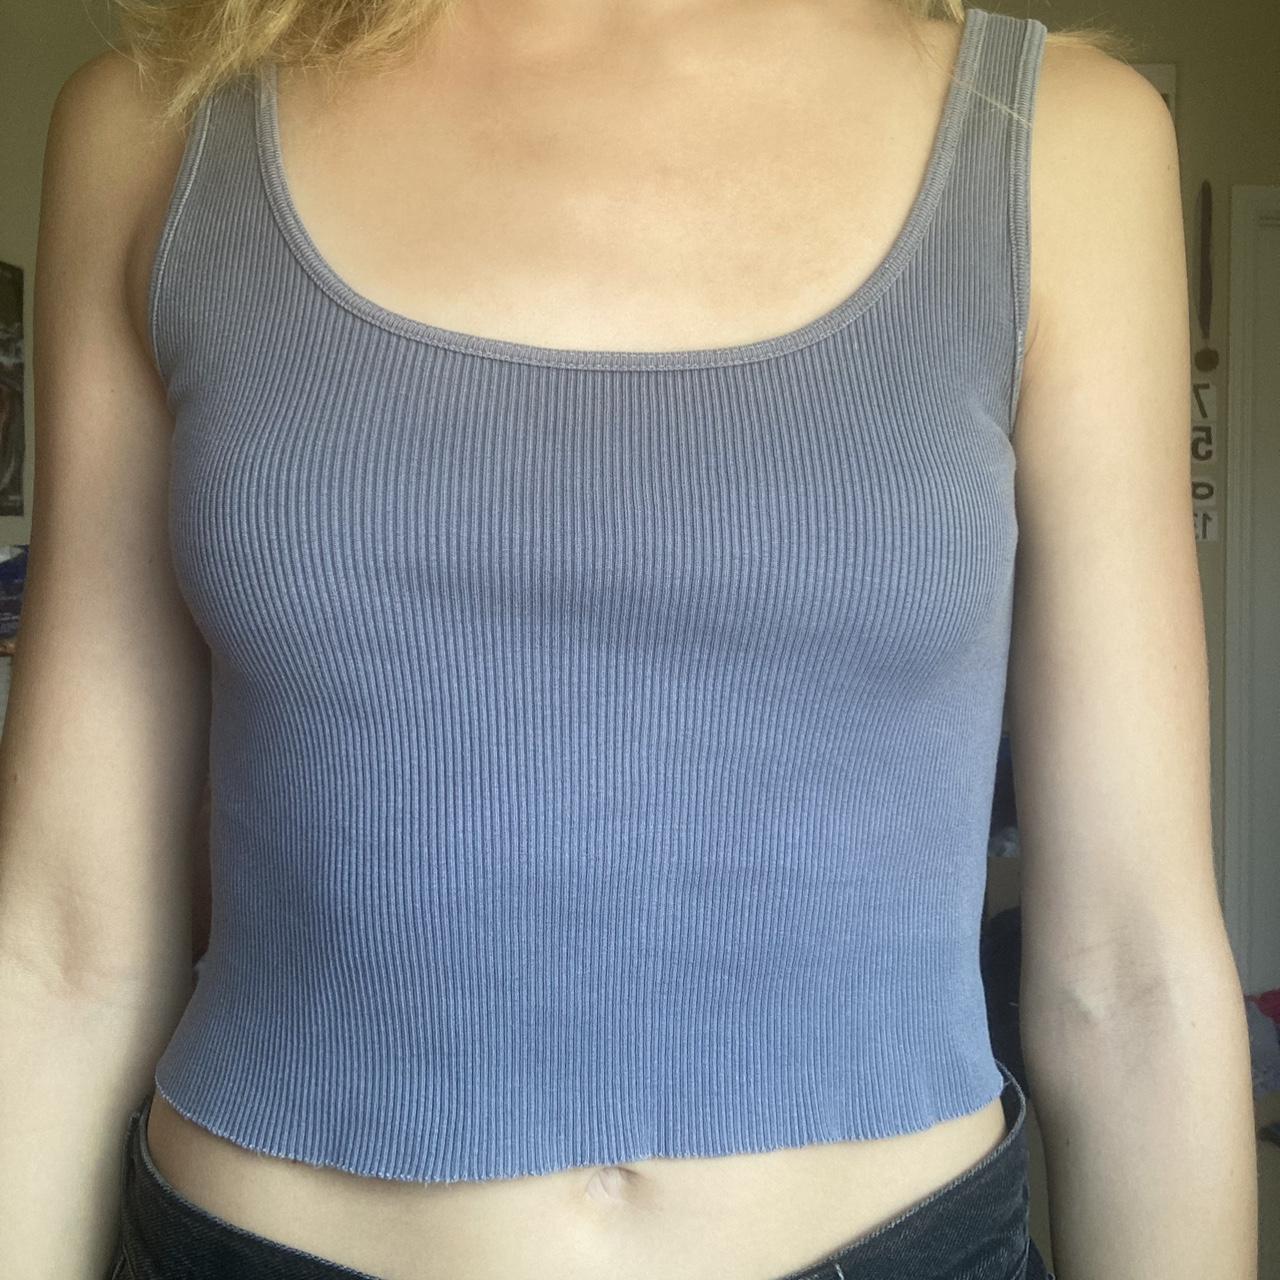 Brandy Melville Sheena Tank Top Blue - $13 (27% Off Retail) - From